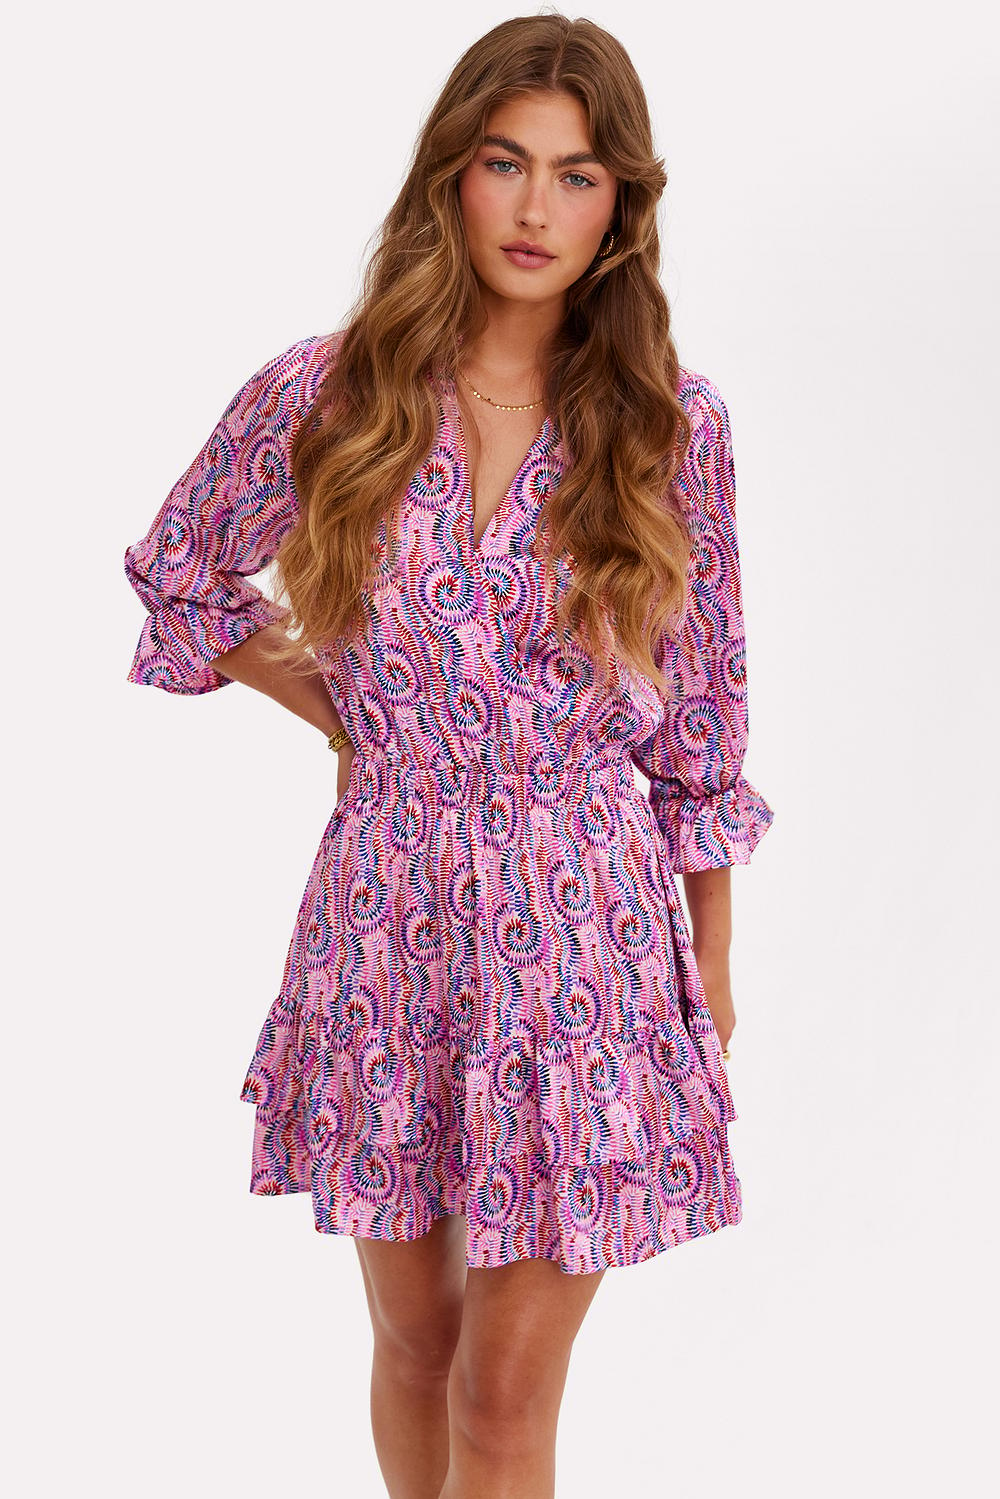 Pink dress with graphic print